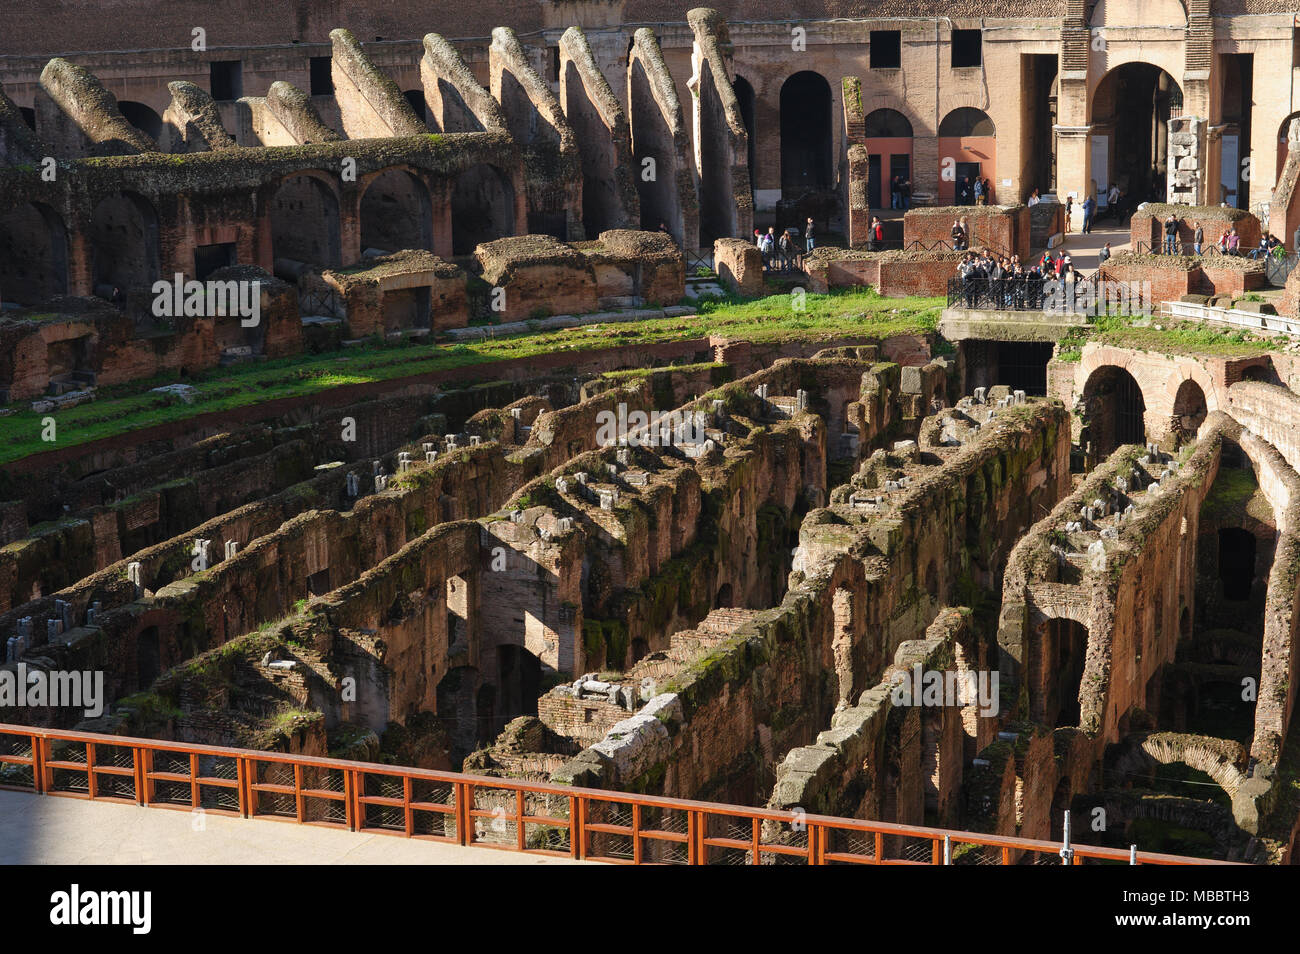 ROME, ITALY - JANUARY 21, 2010: Colosseum(Colosseo) is the largest amphitheatre in the world.  It is locasted in the centre of Rome, Italy. It has an  Stock Photo